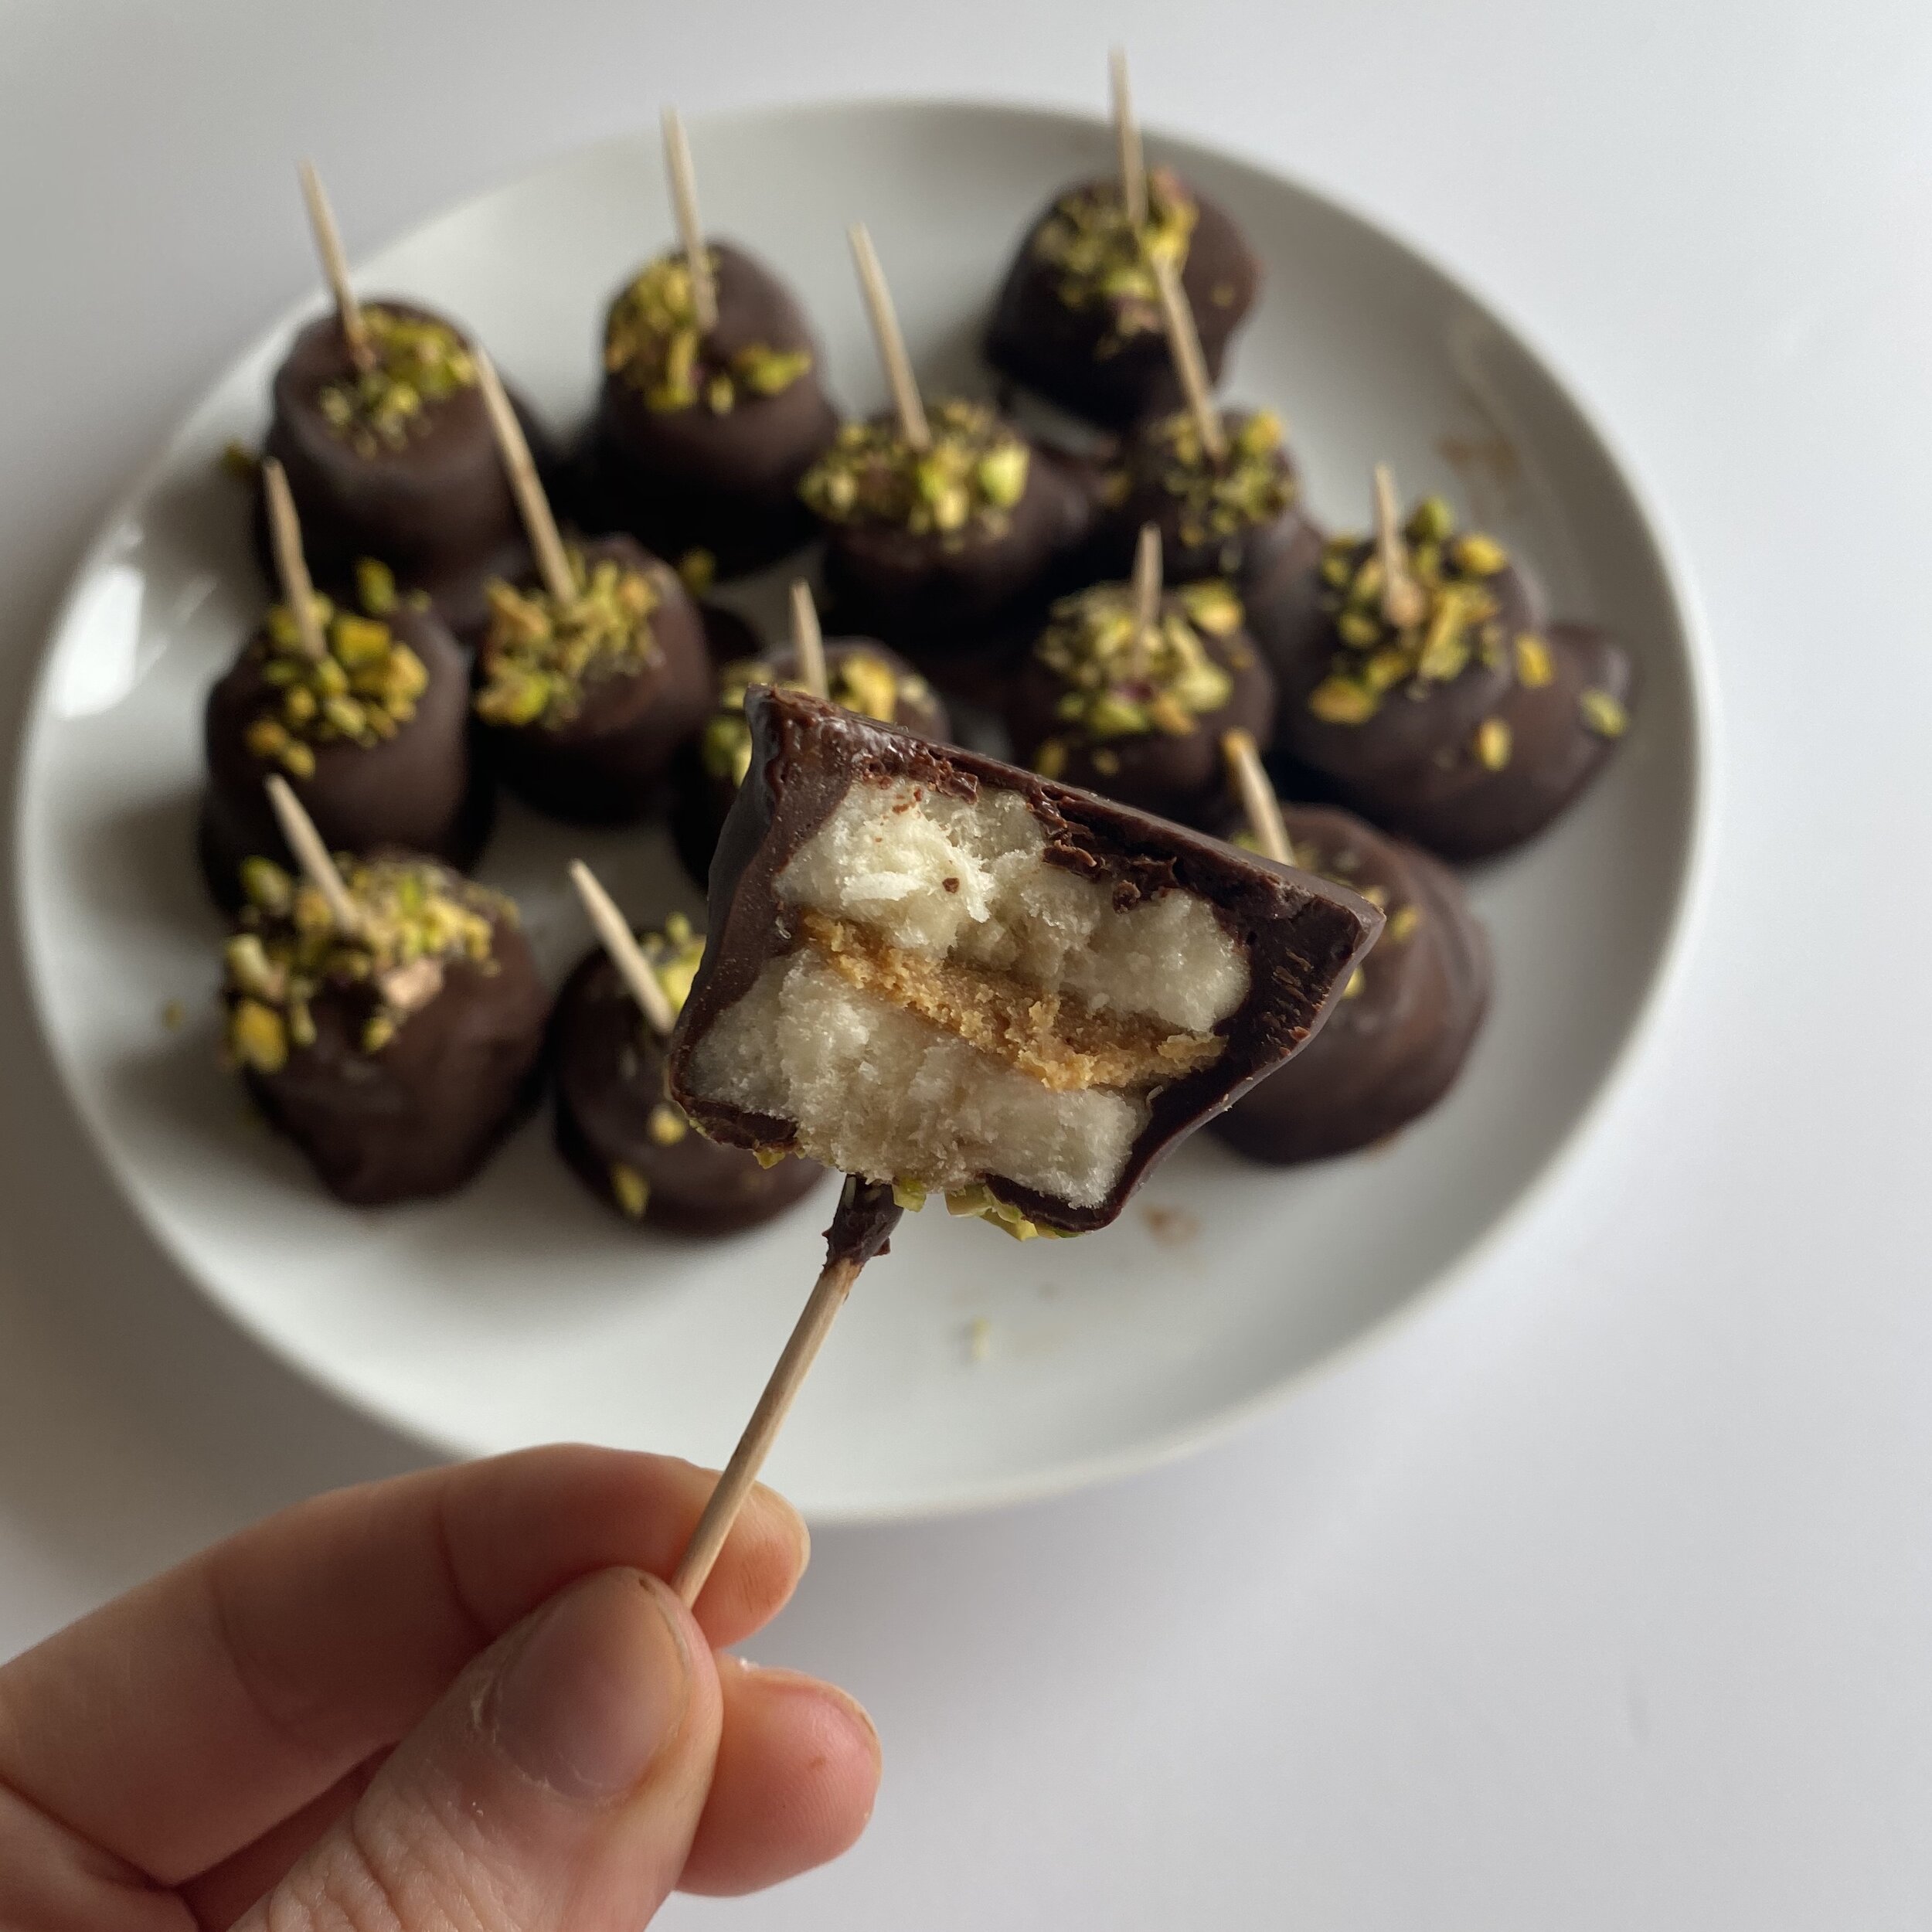 Chocolate-Dipped Peanut Butter Banana Bites with Pistachio Sprinkles 